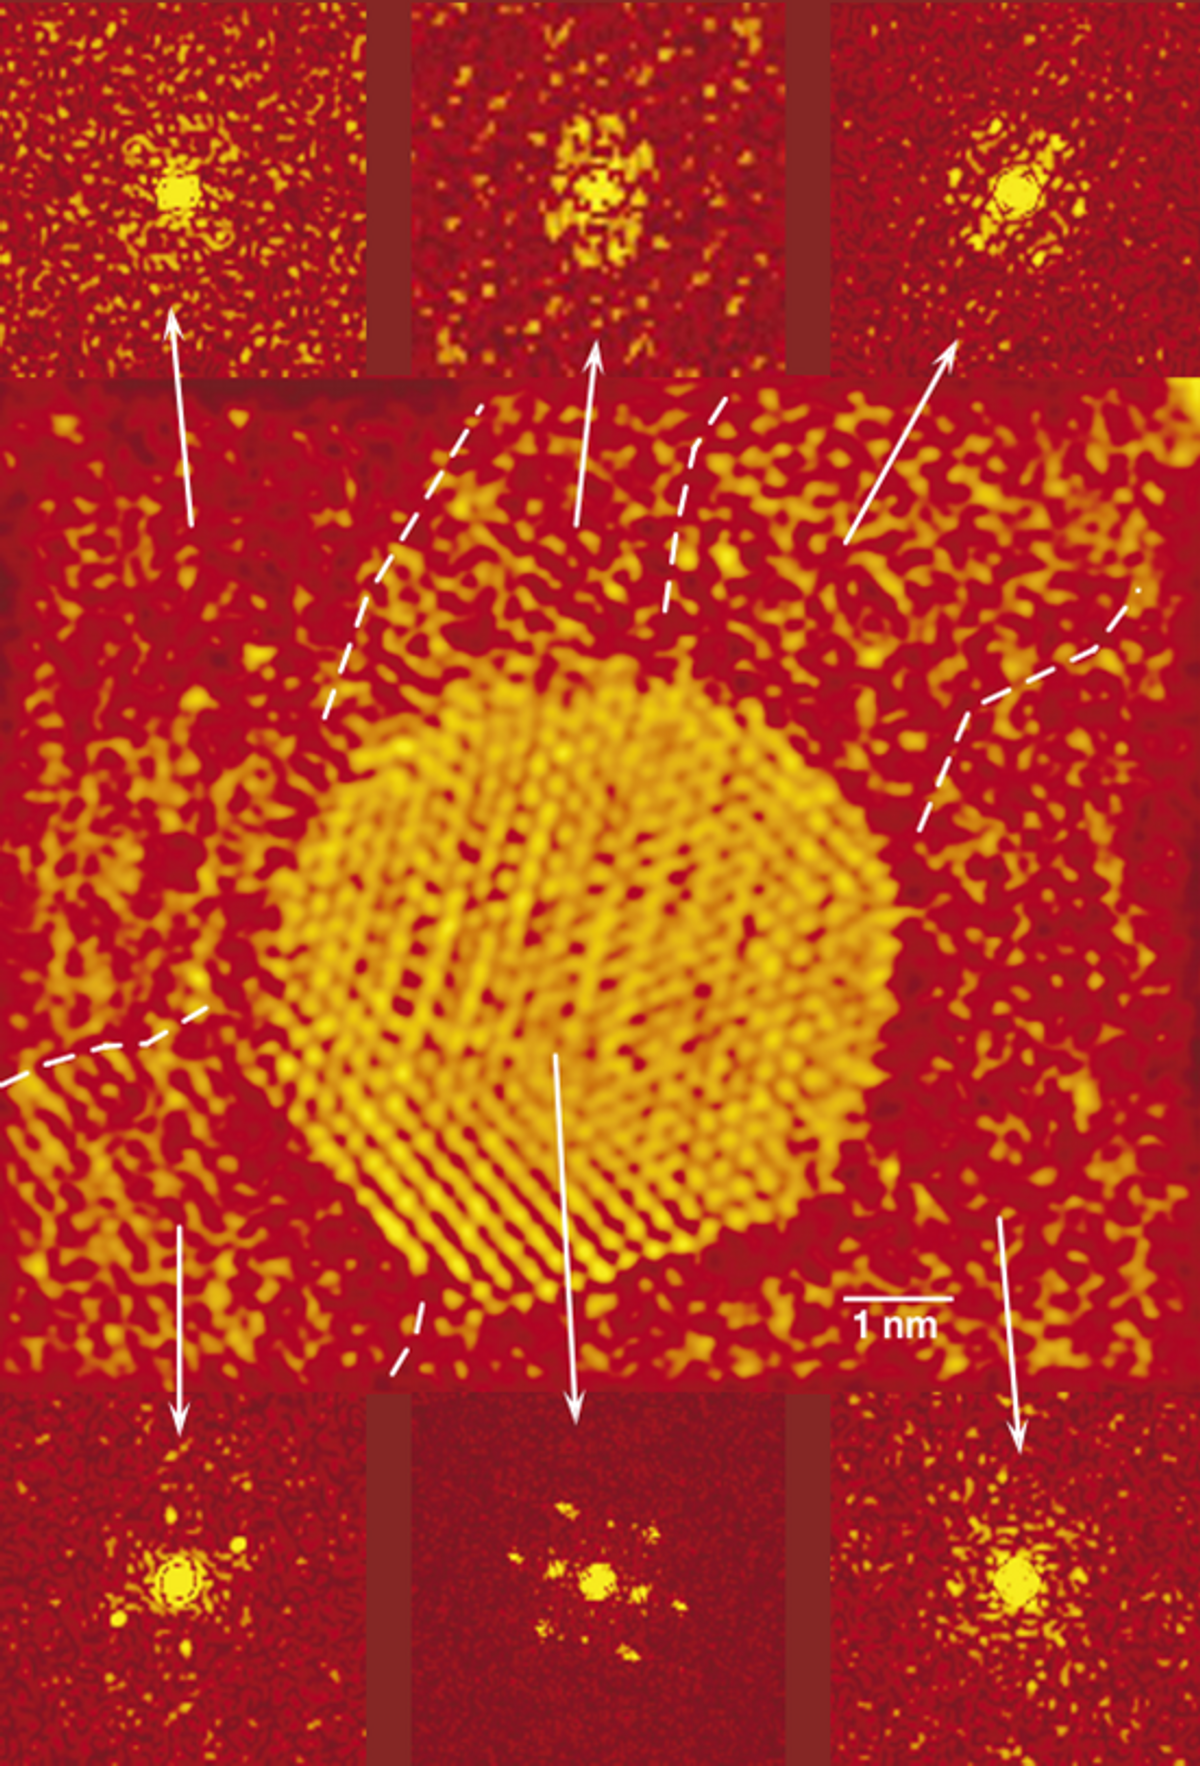 Figure 3. Atomic resolution image of an island of Au on an amorphous carbon substrate. The island is surrounded by monoatomic clusters of Au. Diffraction patterns from different regions surrounding the island show that these clusters are ordered in various structures adjacent to the built-up islands. Nature 418, 617-620 (2002); © Springer Nature Ltd.